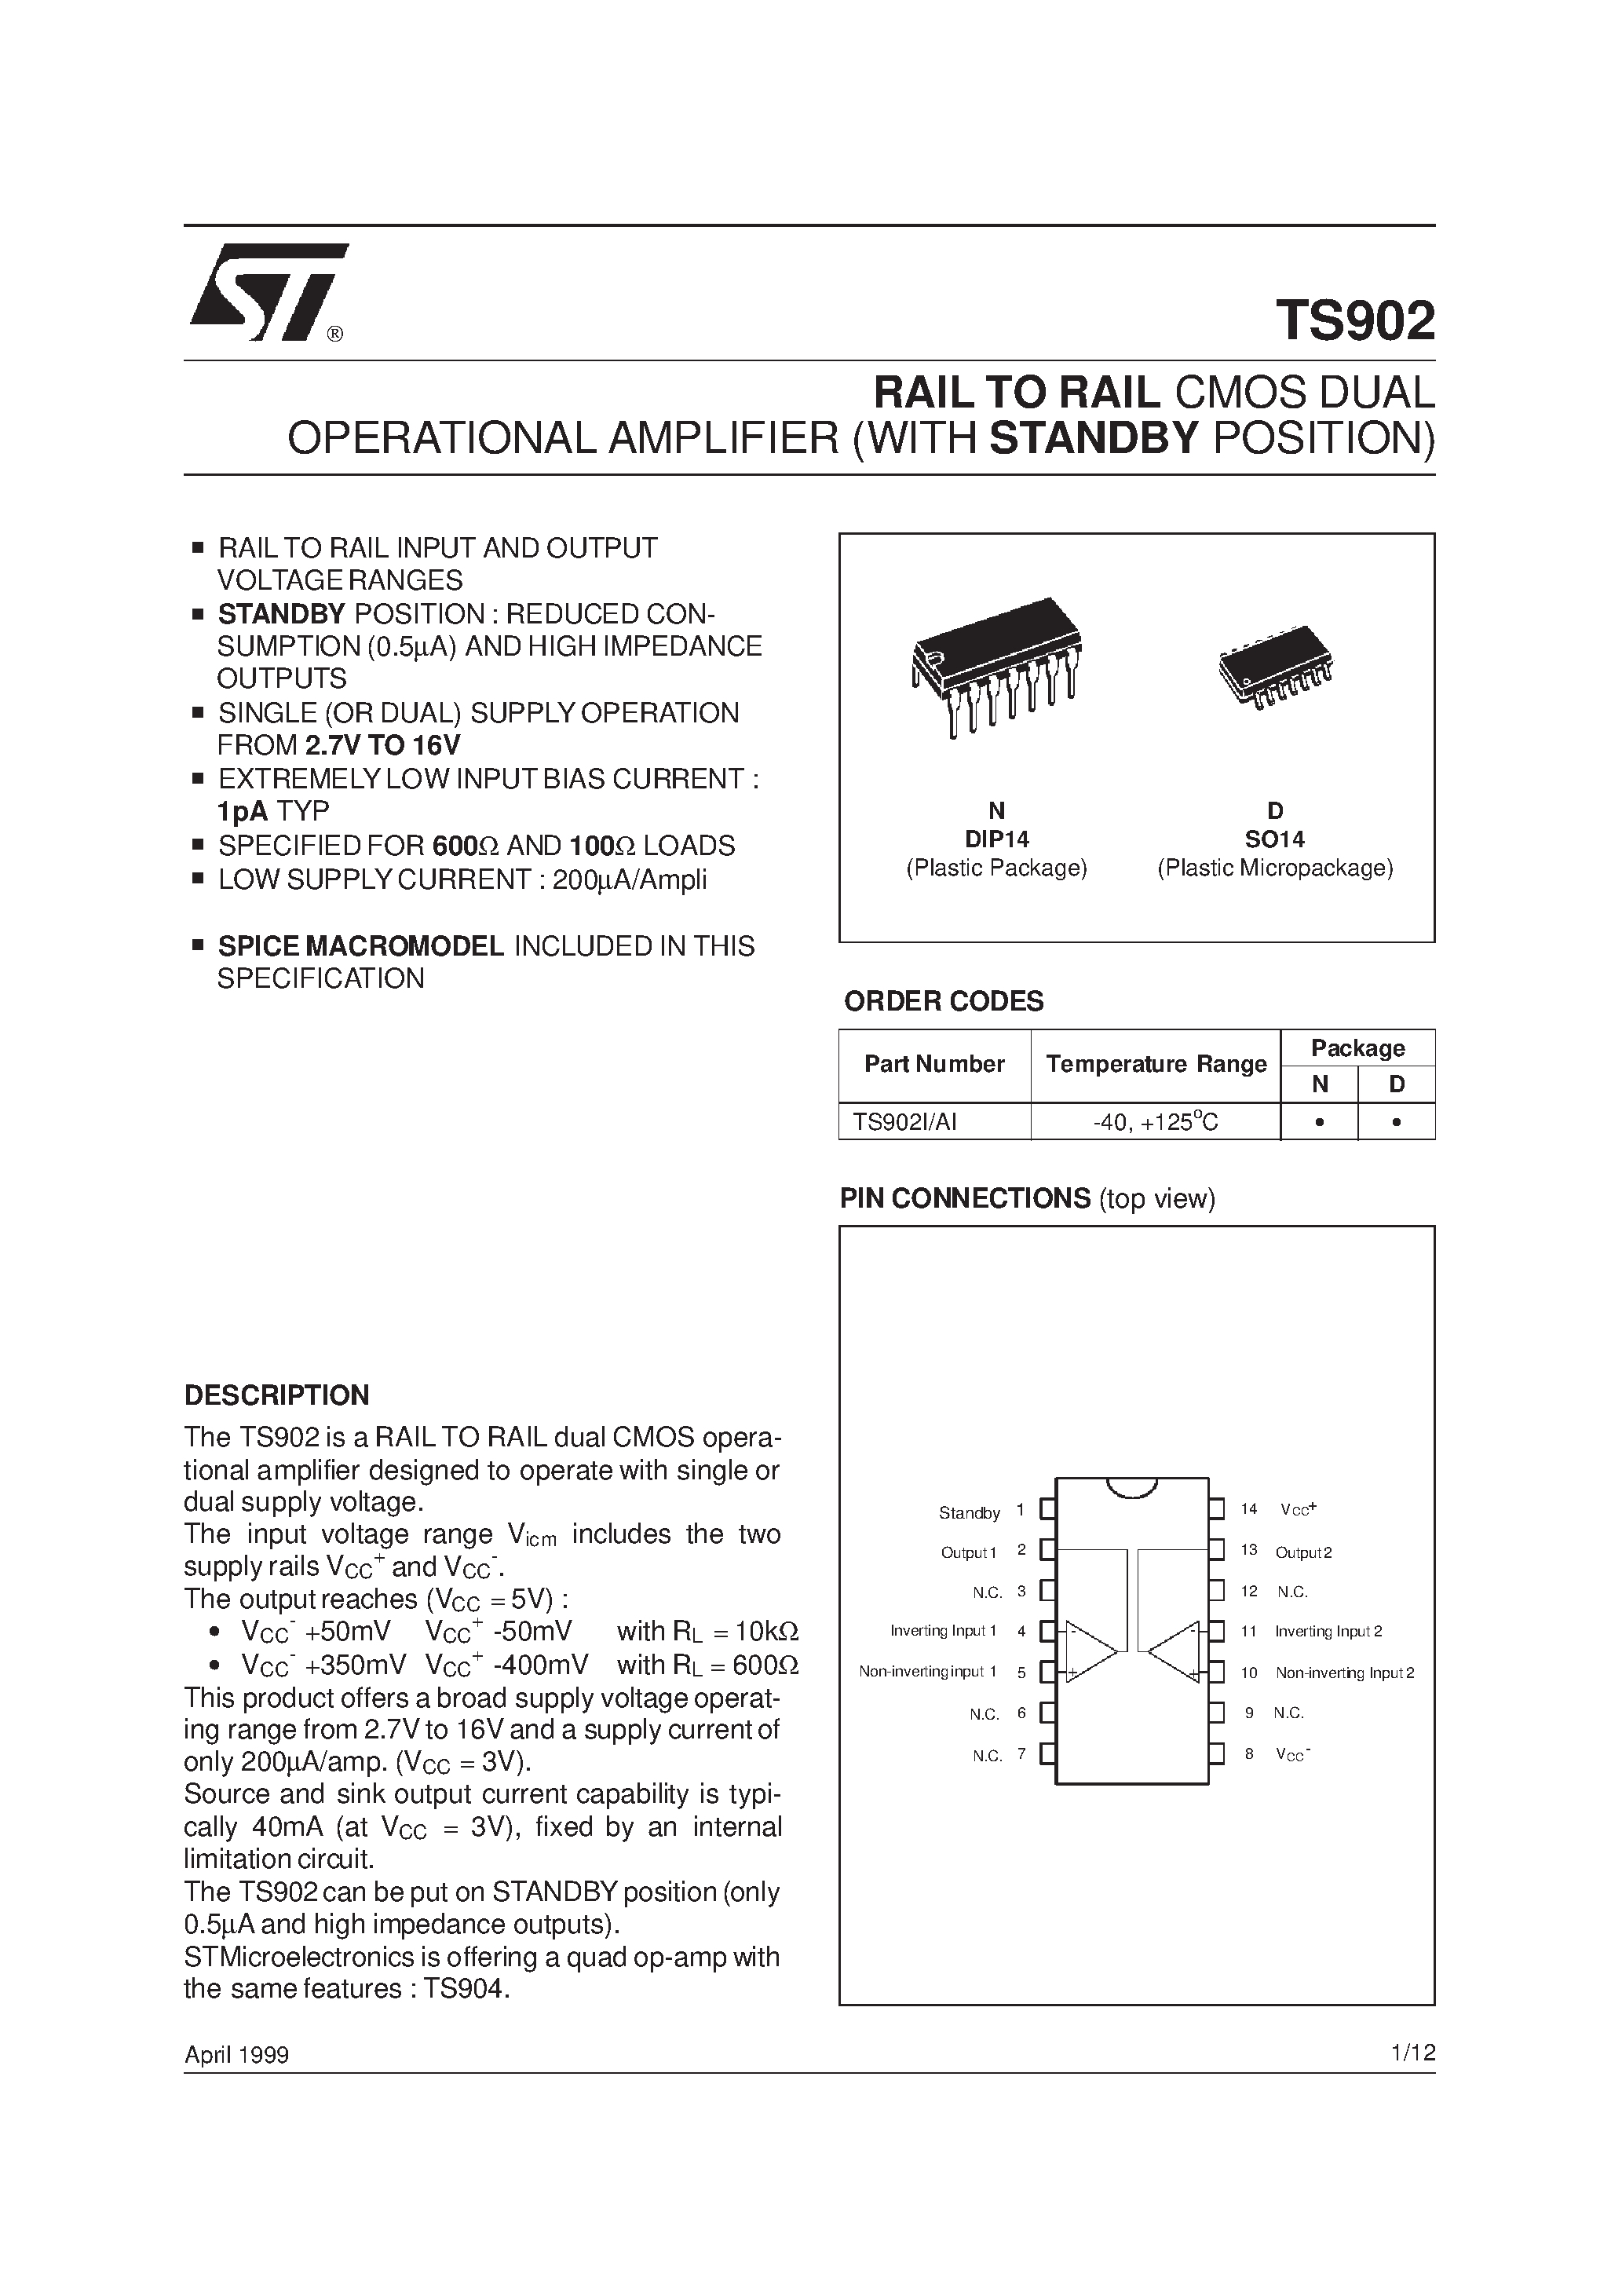 Datasheet TS902 - RAIL TO RAIL CMOS DUAL OPERATIONAL AMPLIFIER WITH STANDBY POSITION page 1